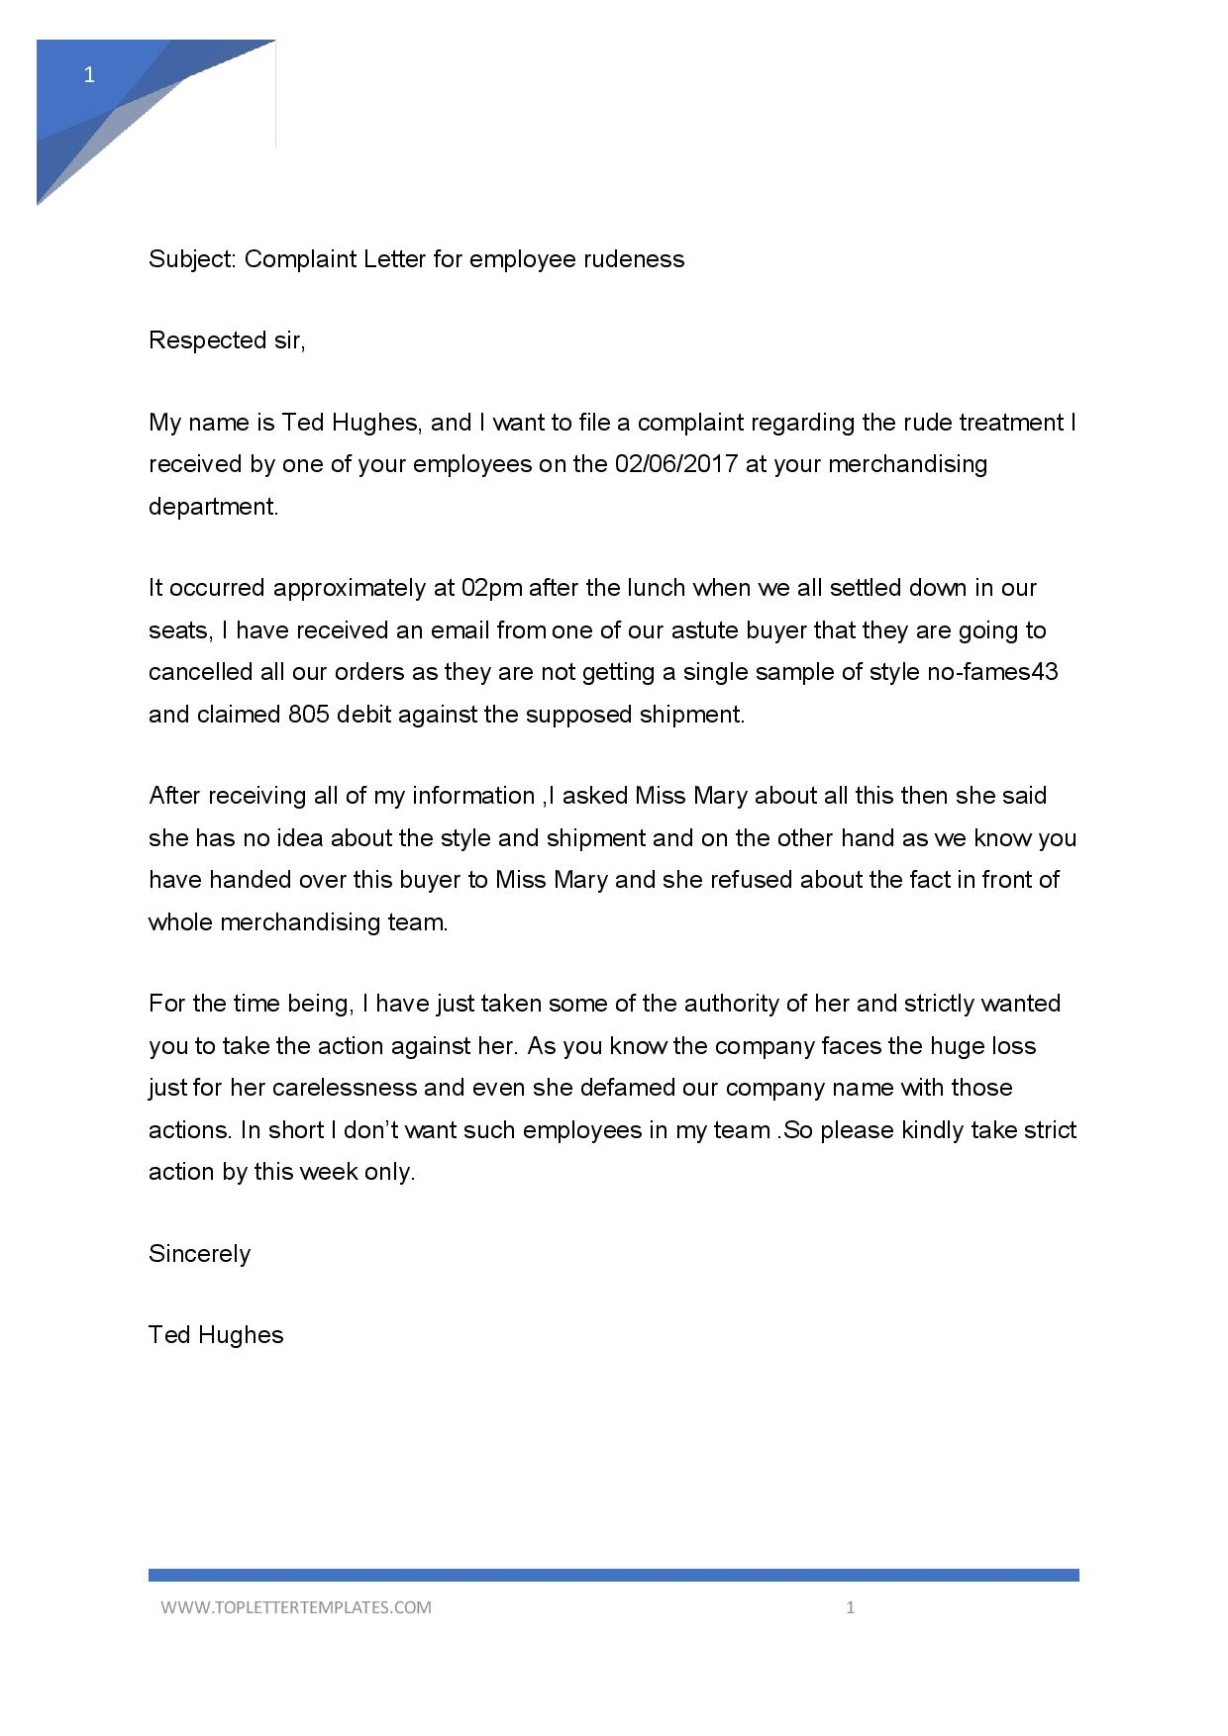 How To Write A Complaint Letter About An Employee Rudeness – Top Letter Intended For Grievance Template Letters